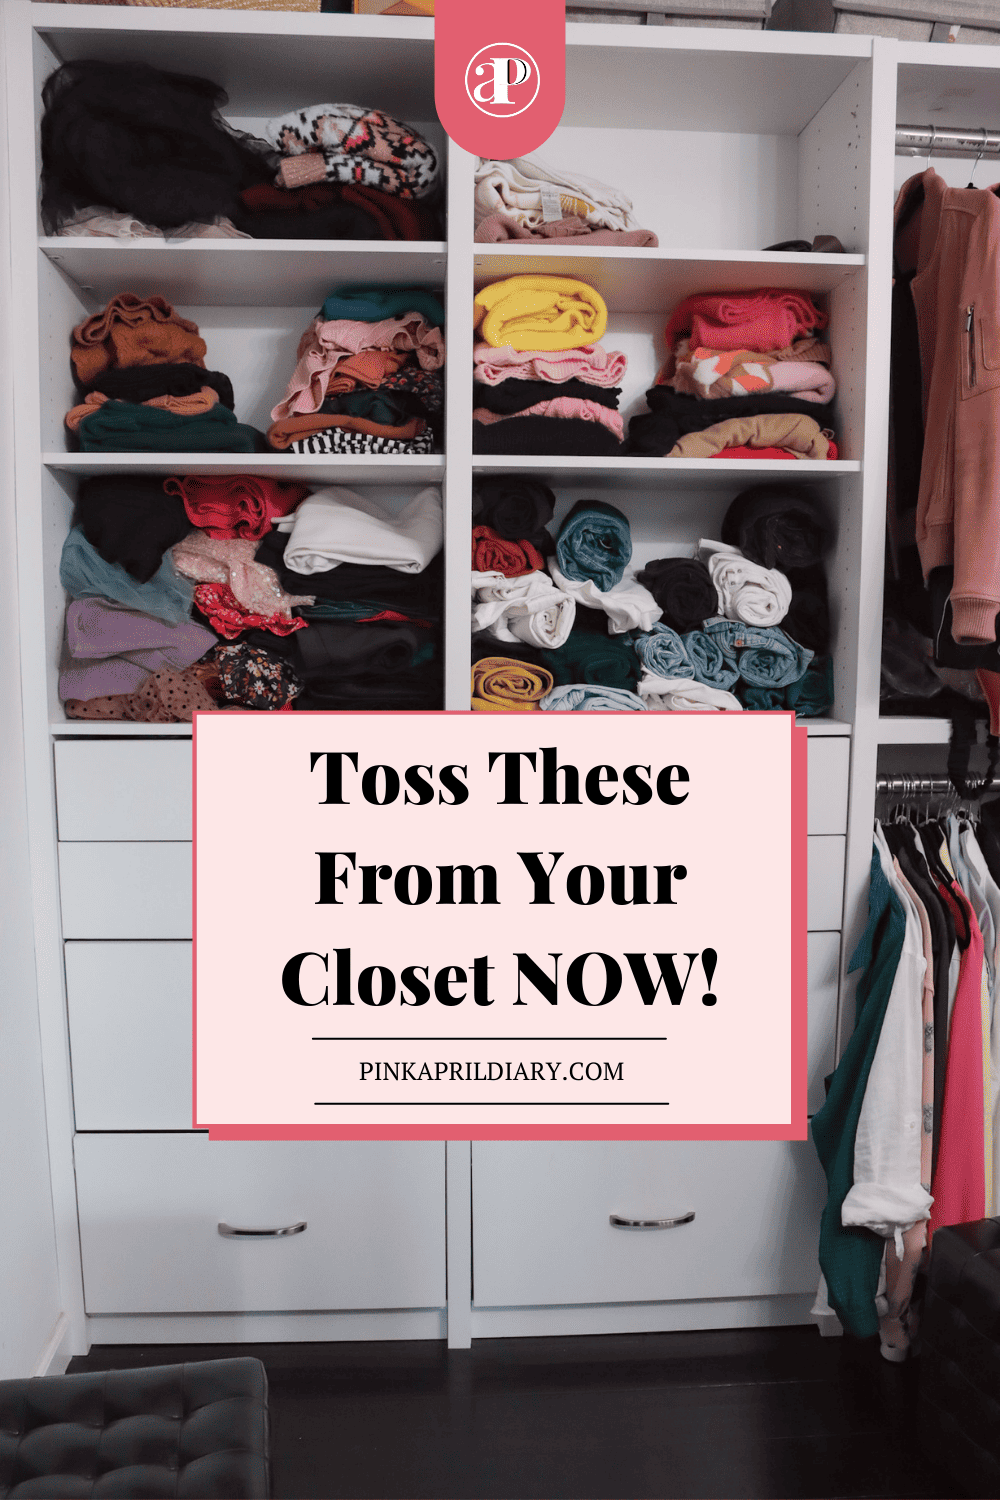 10 Items You Should Toss From Your Closet Now for a Better Style